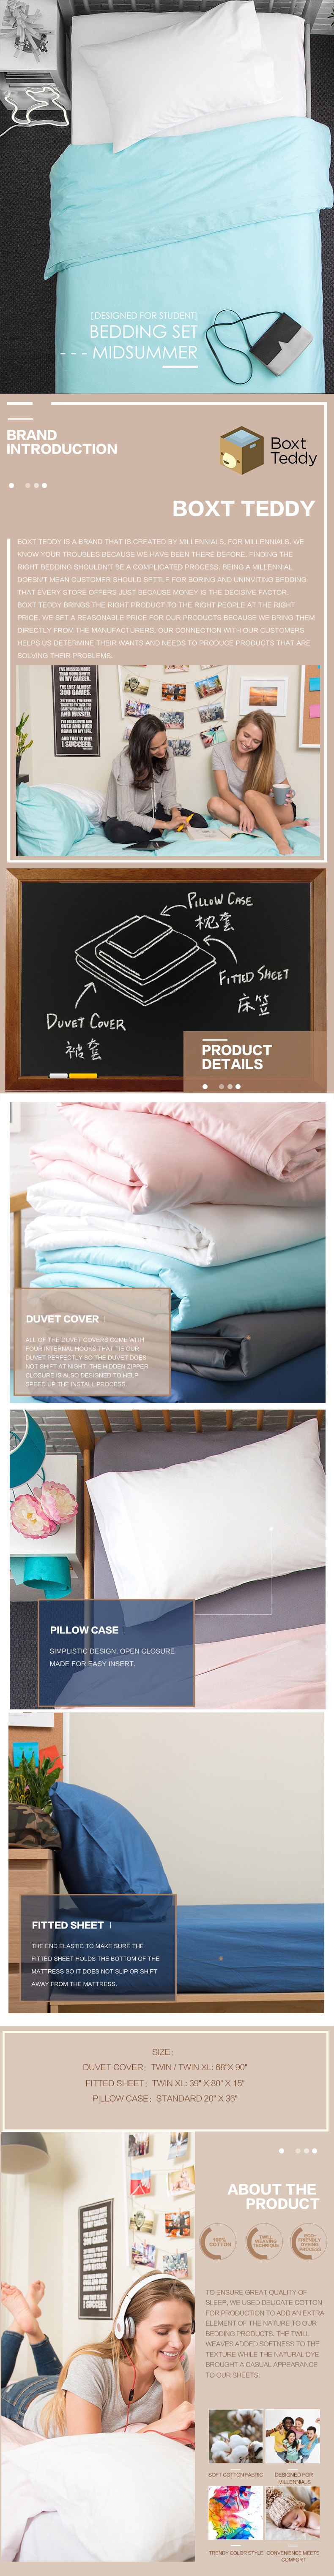 [Designed For Students] All Cotton 3 Pieces Bedding Set #Midsummer  Twin XL